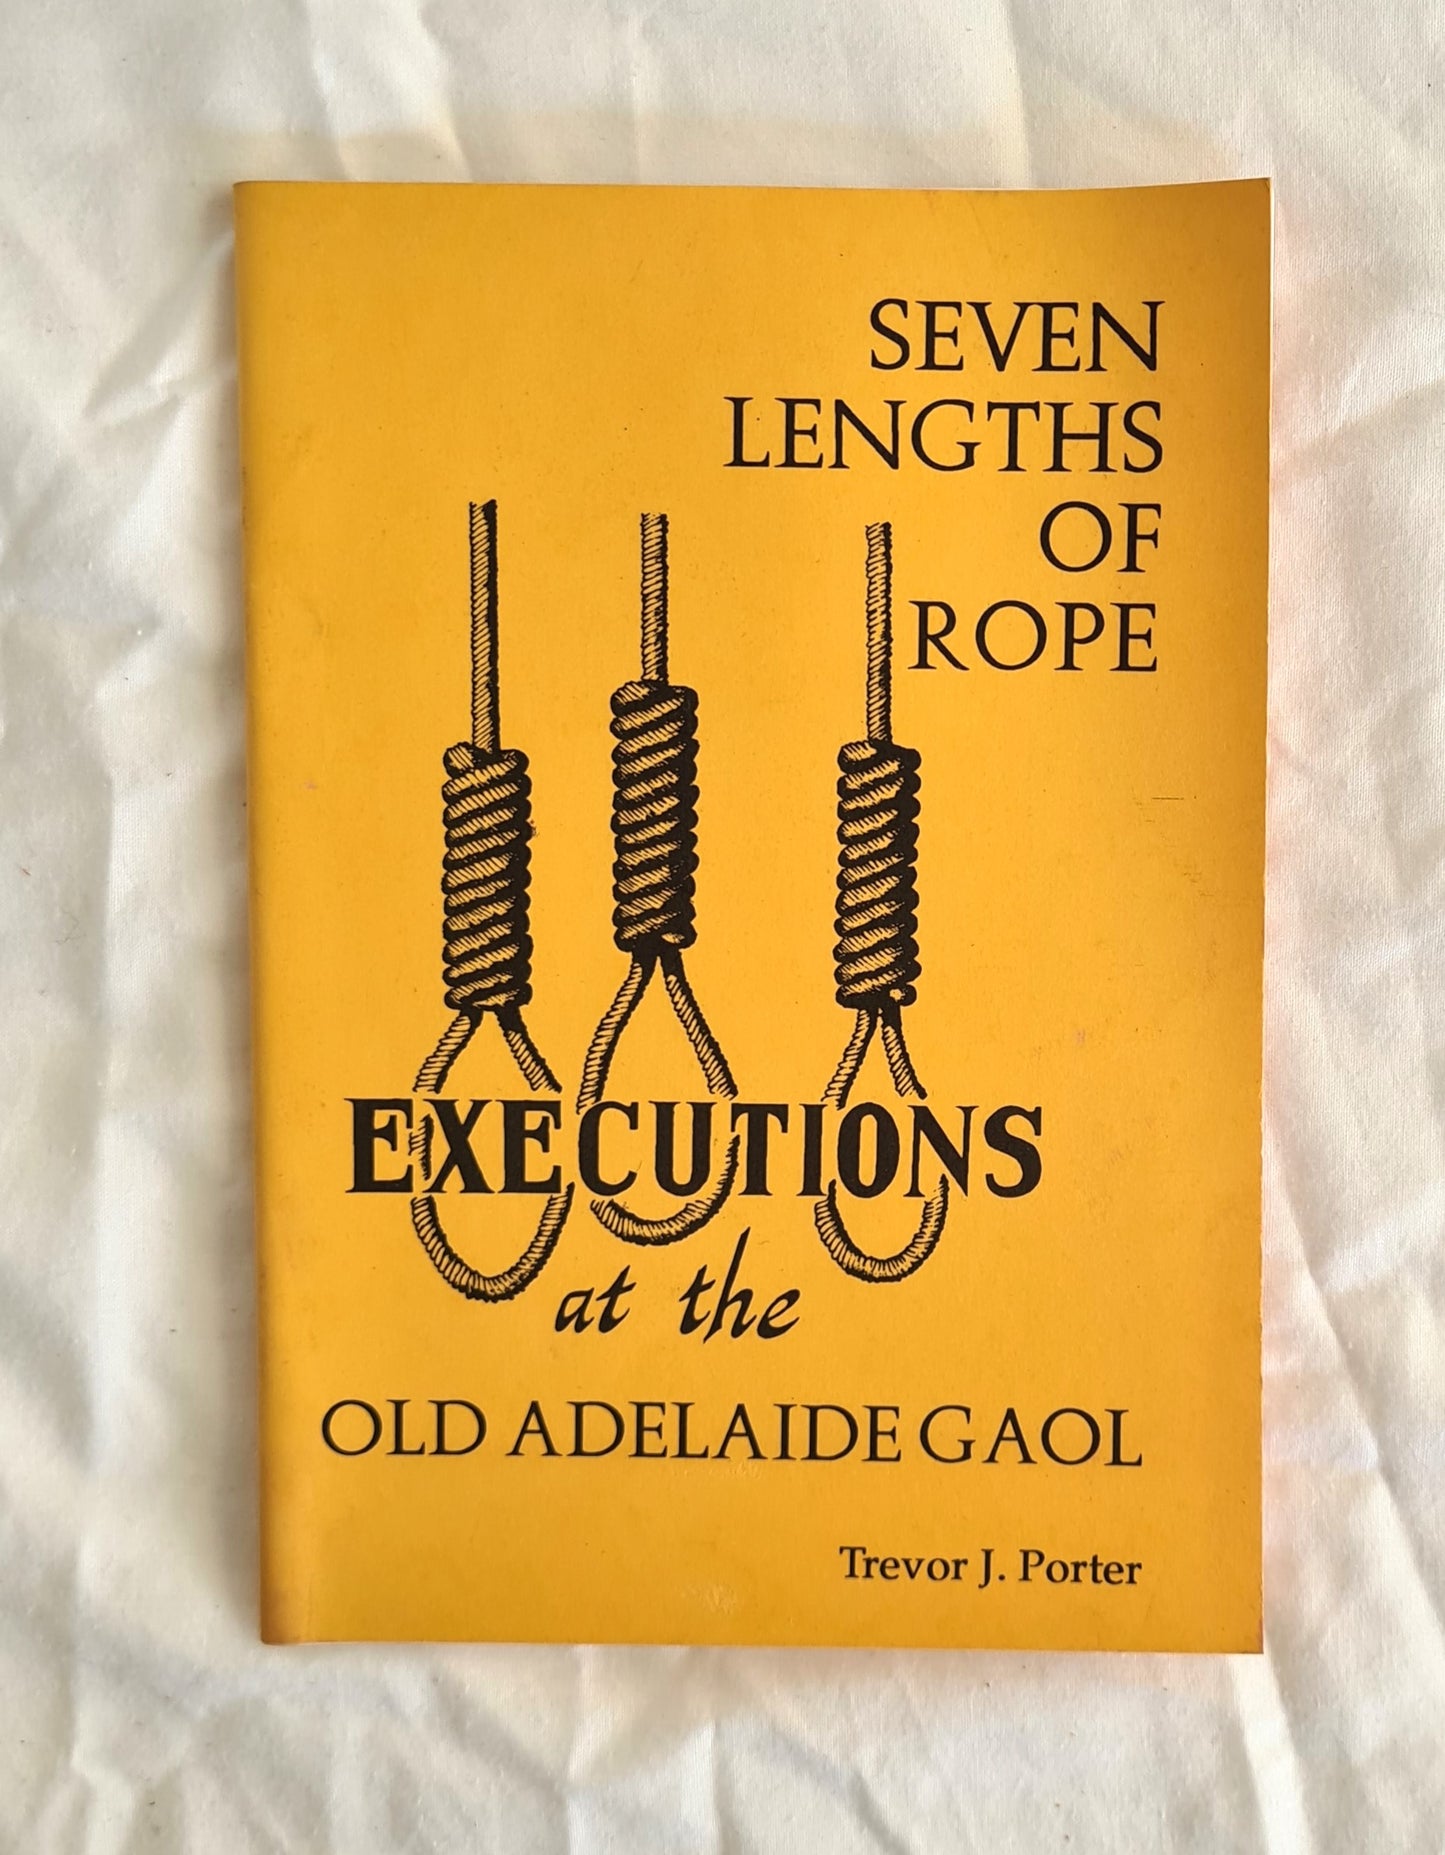 Seven Lengths of Rope  Executions at the Old Adelaide Gaol  by Trevor J. Porter